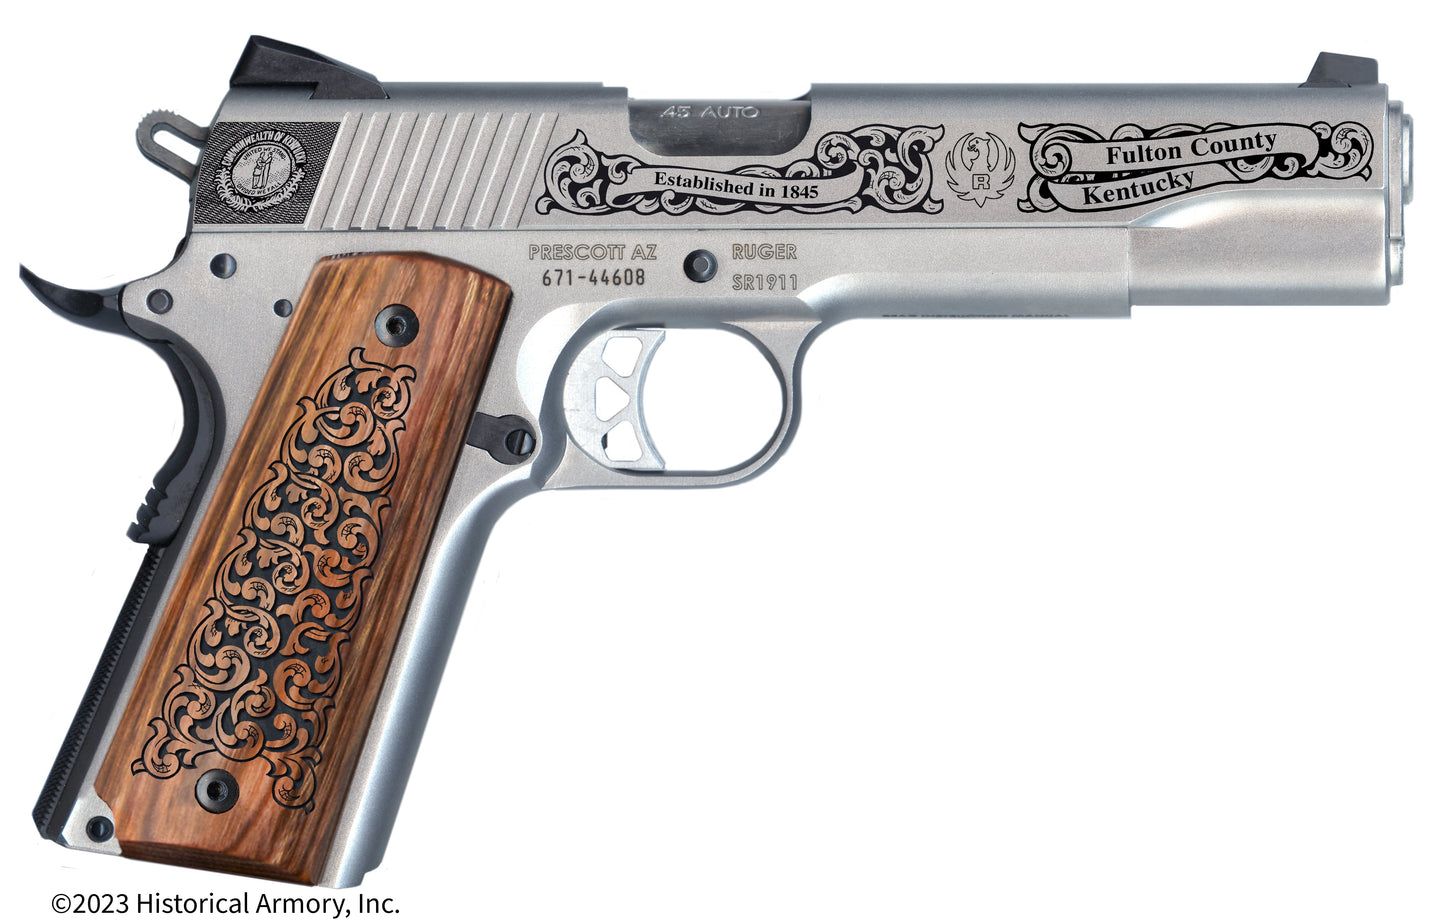 Fulton County Kentucky Engraved .45 Auto Ruger 1911